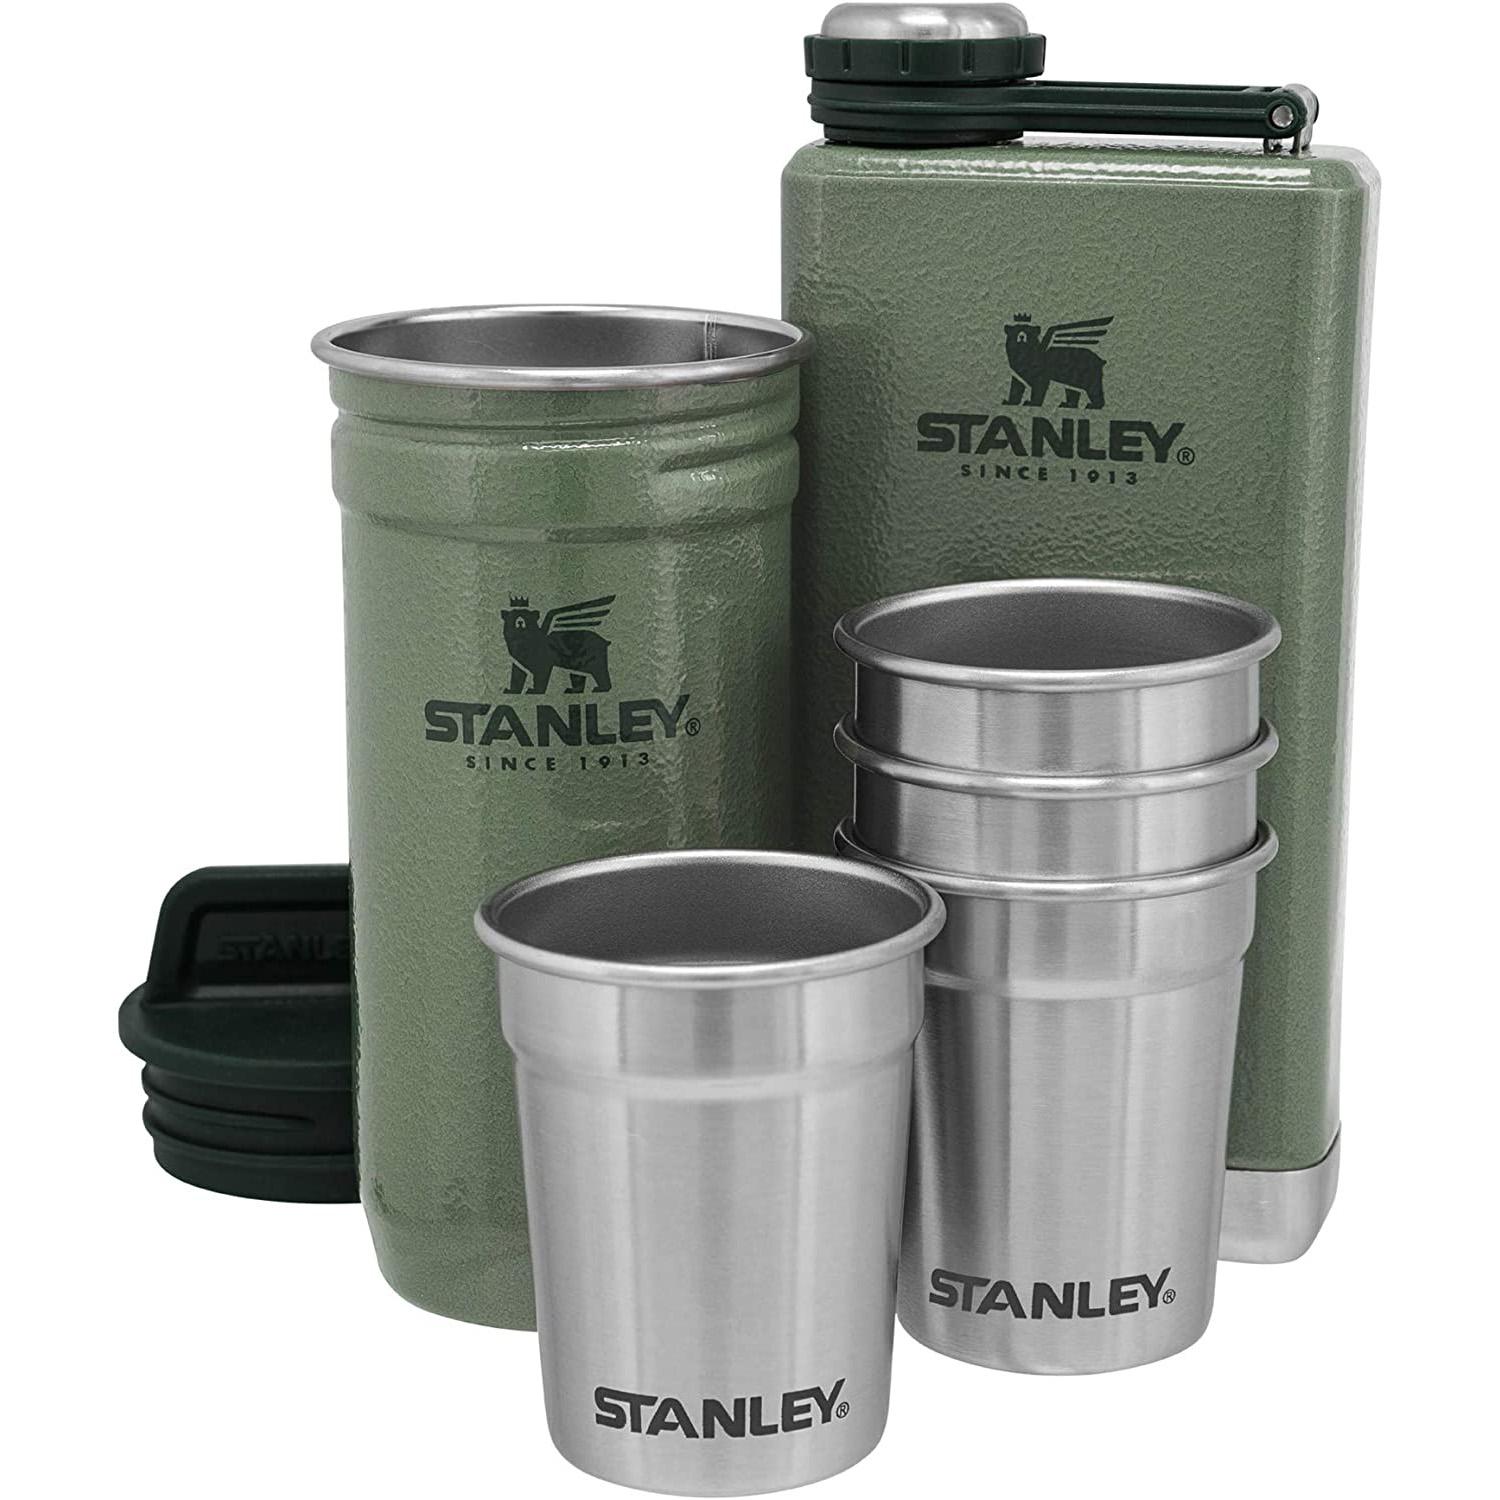 6-Piece Stanley Adventure Shot Glass And Flask Set for $20.70